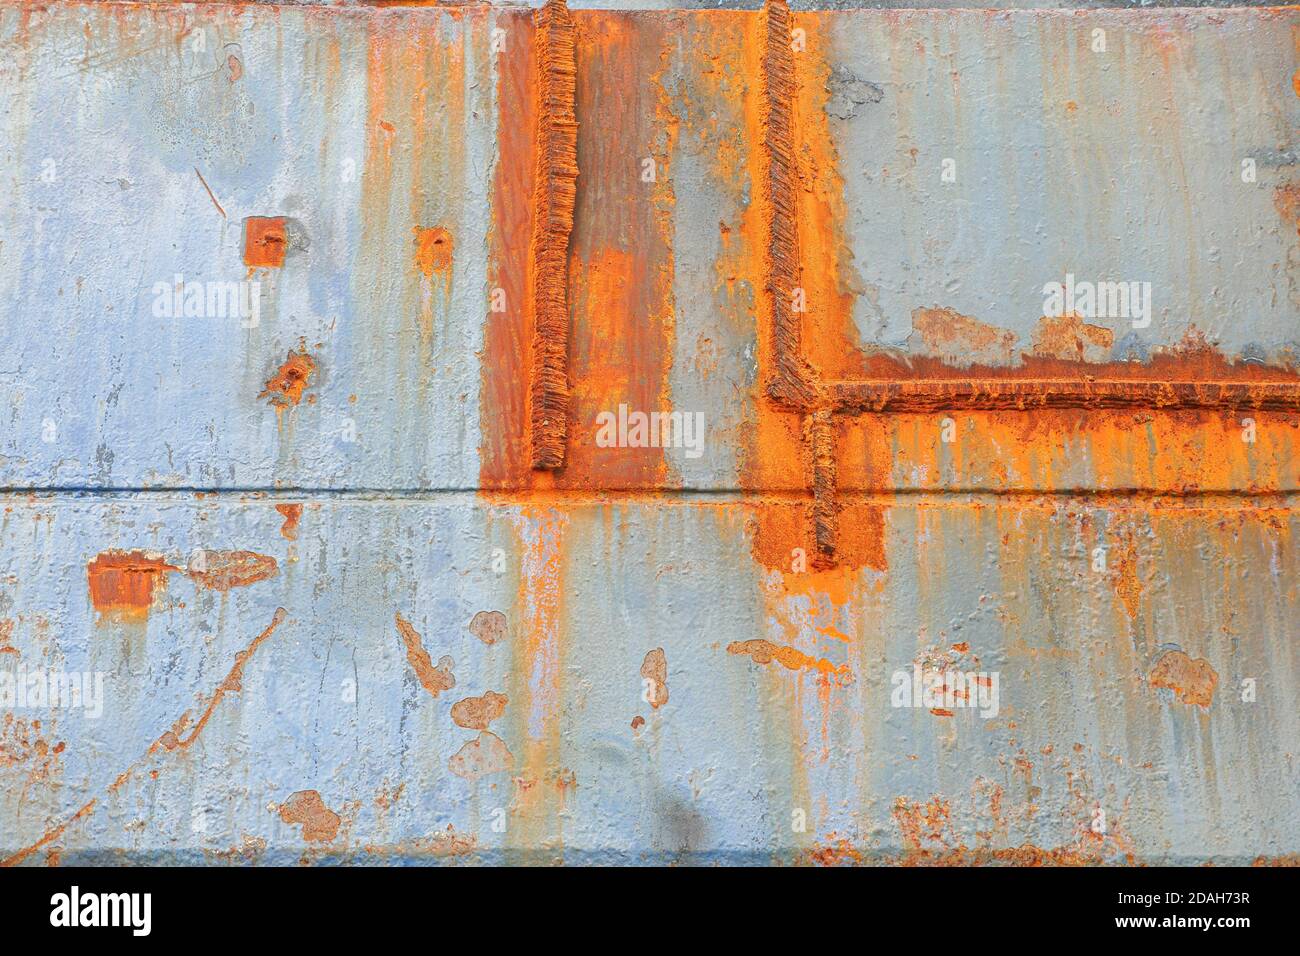 Concrete wall with rust on metal and chipped paint. Abstract. Low angle view. Stock Photo